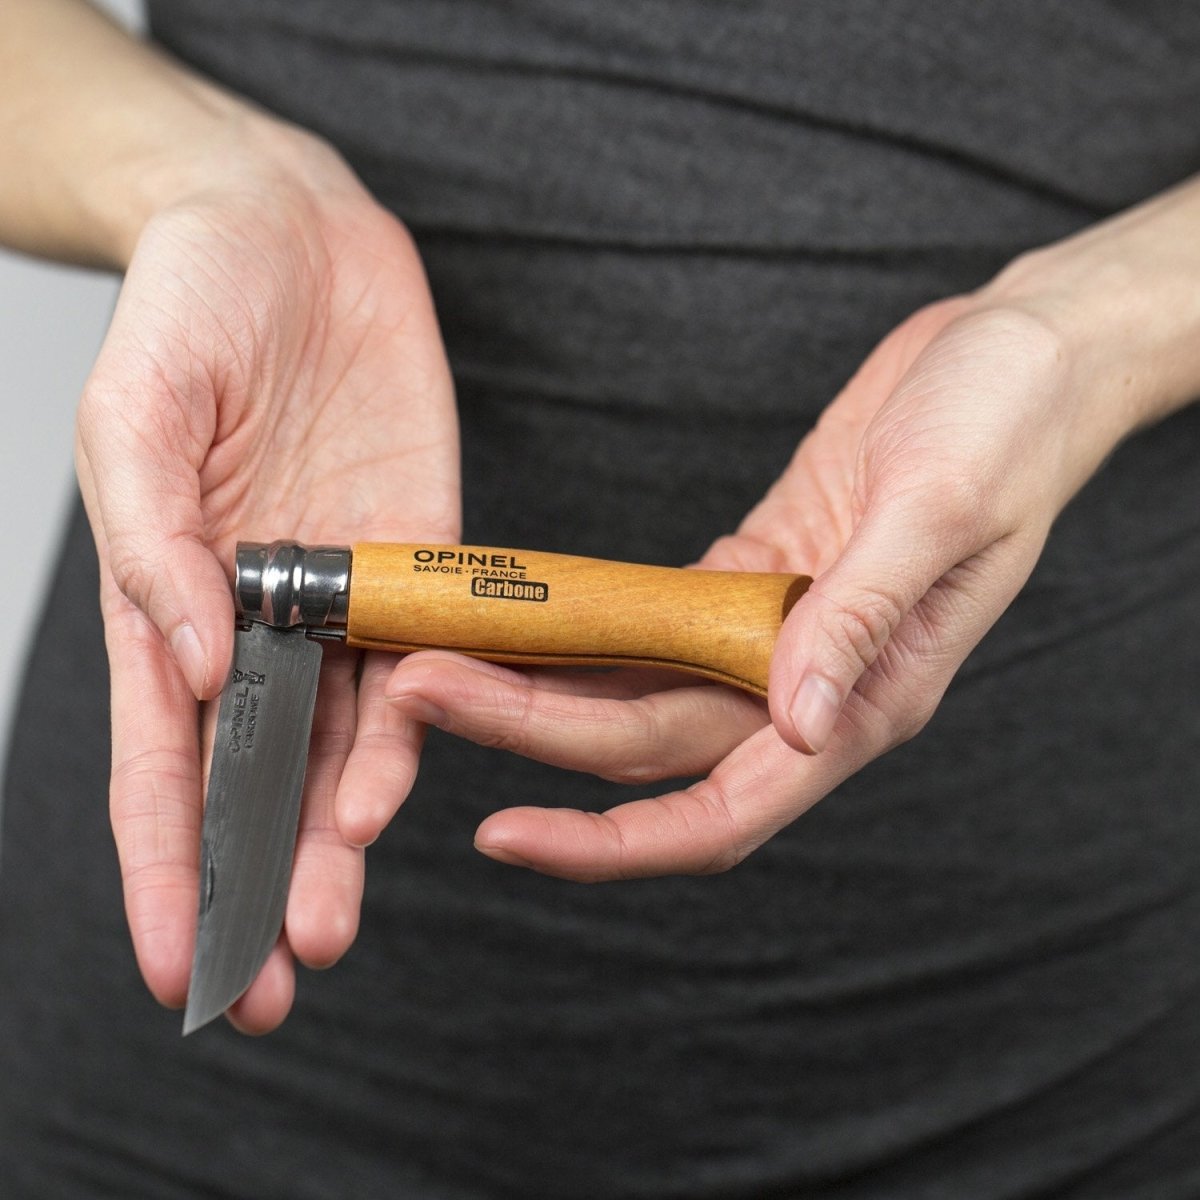 https://cdn.shopify.com/s/files/1/0060/6162/products/opinel_knife_in_hands-721919_1200x.jpg?v=1702472593